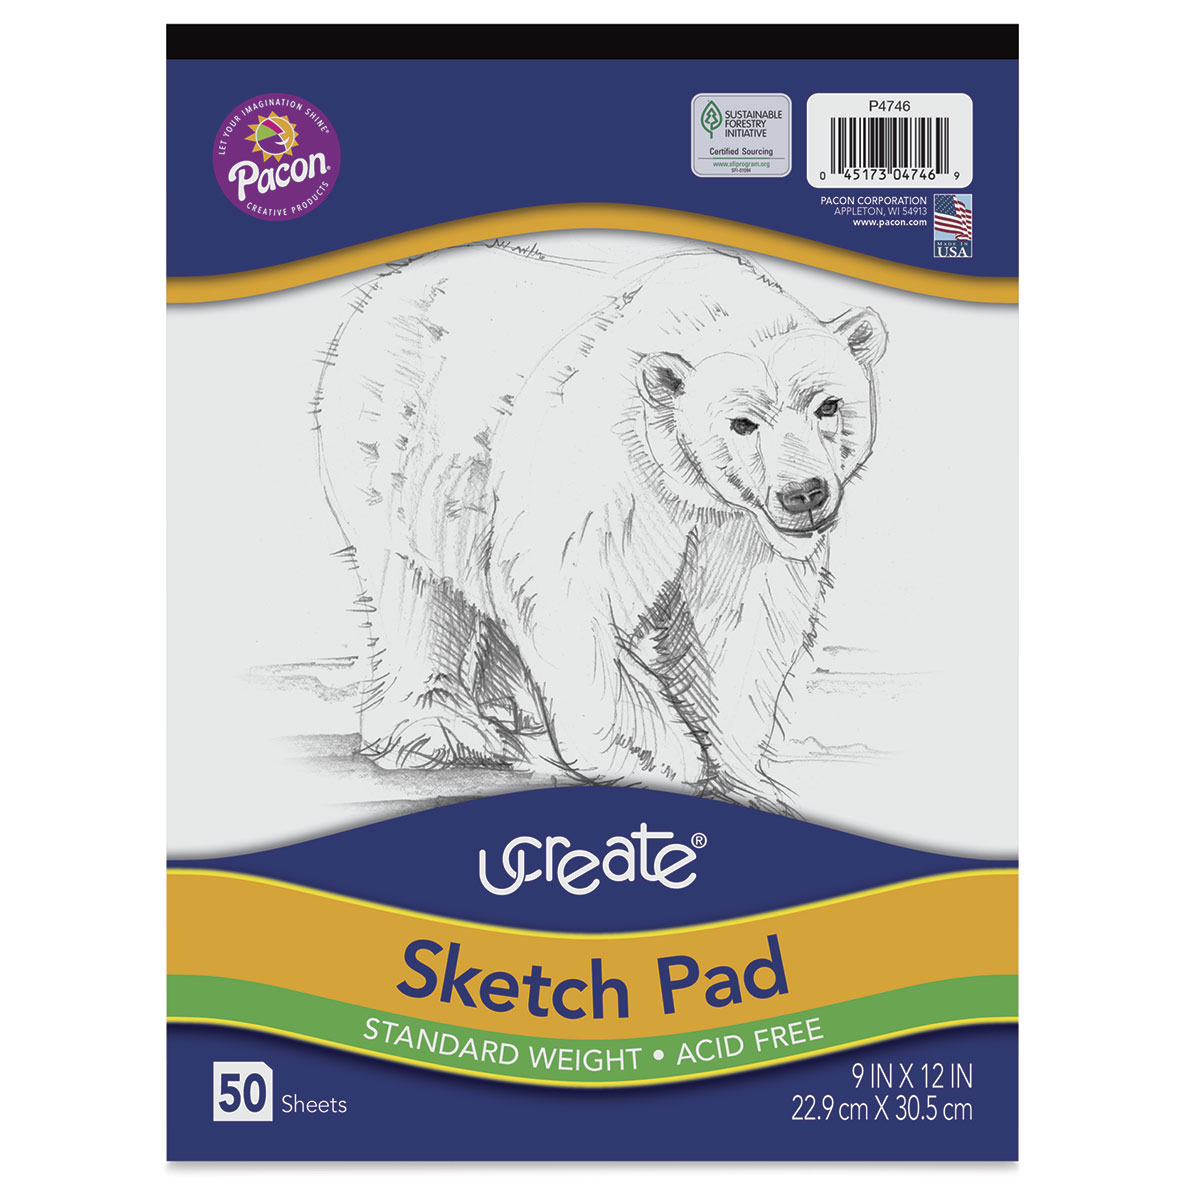 Kids' Drawing and Sketch Pads